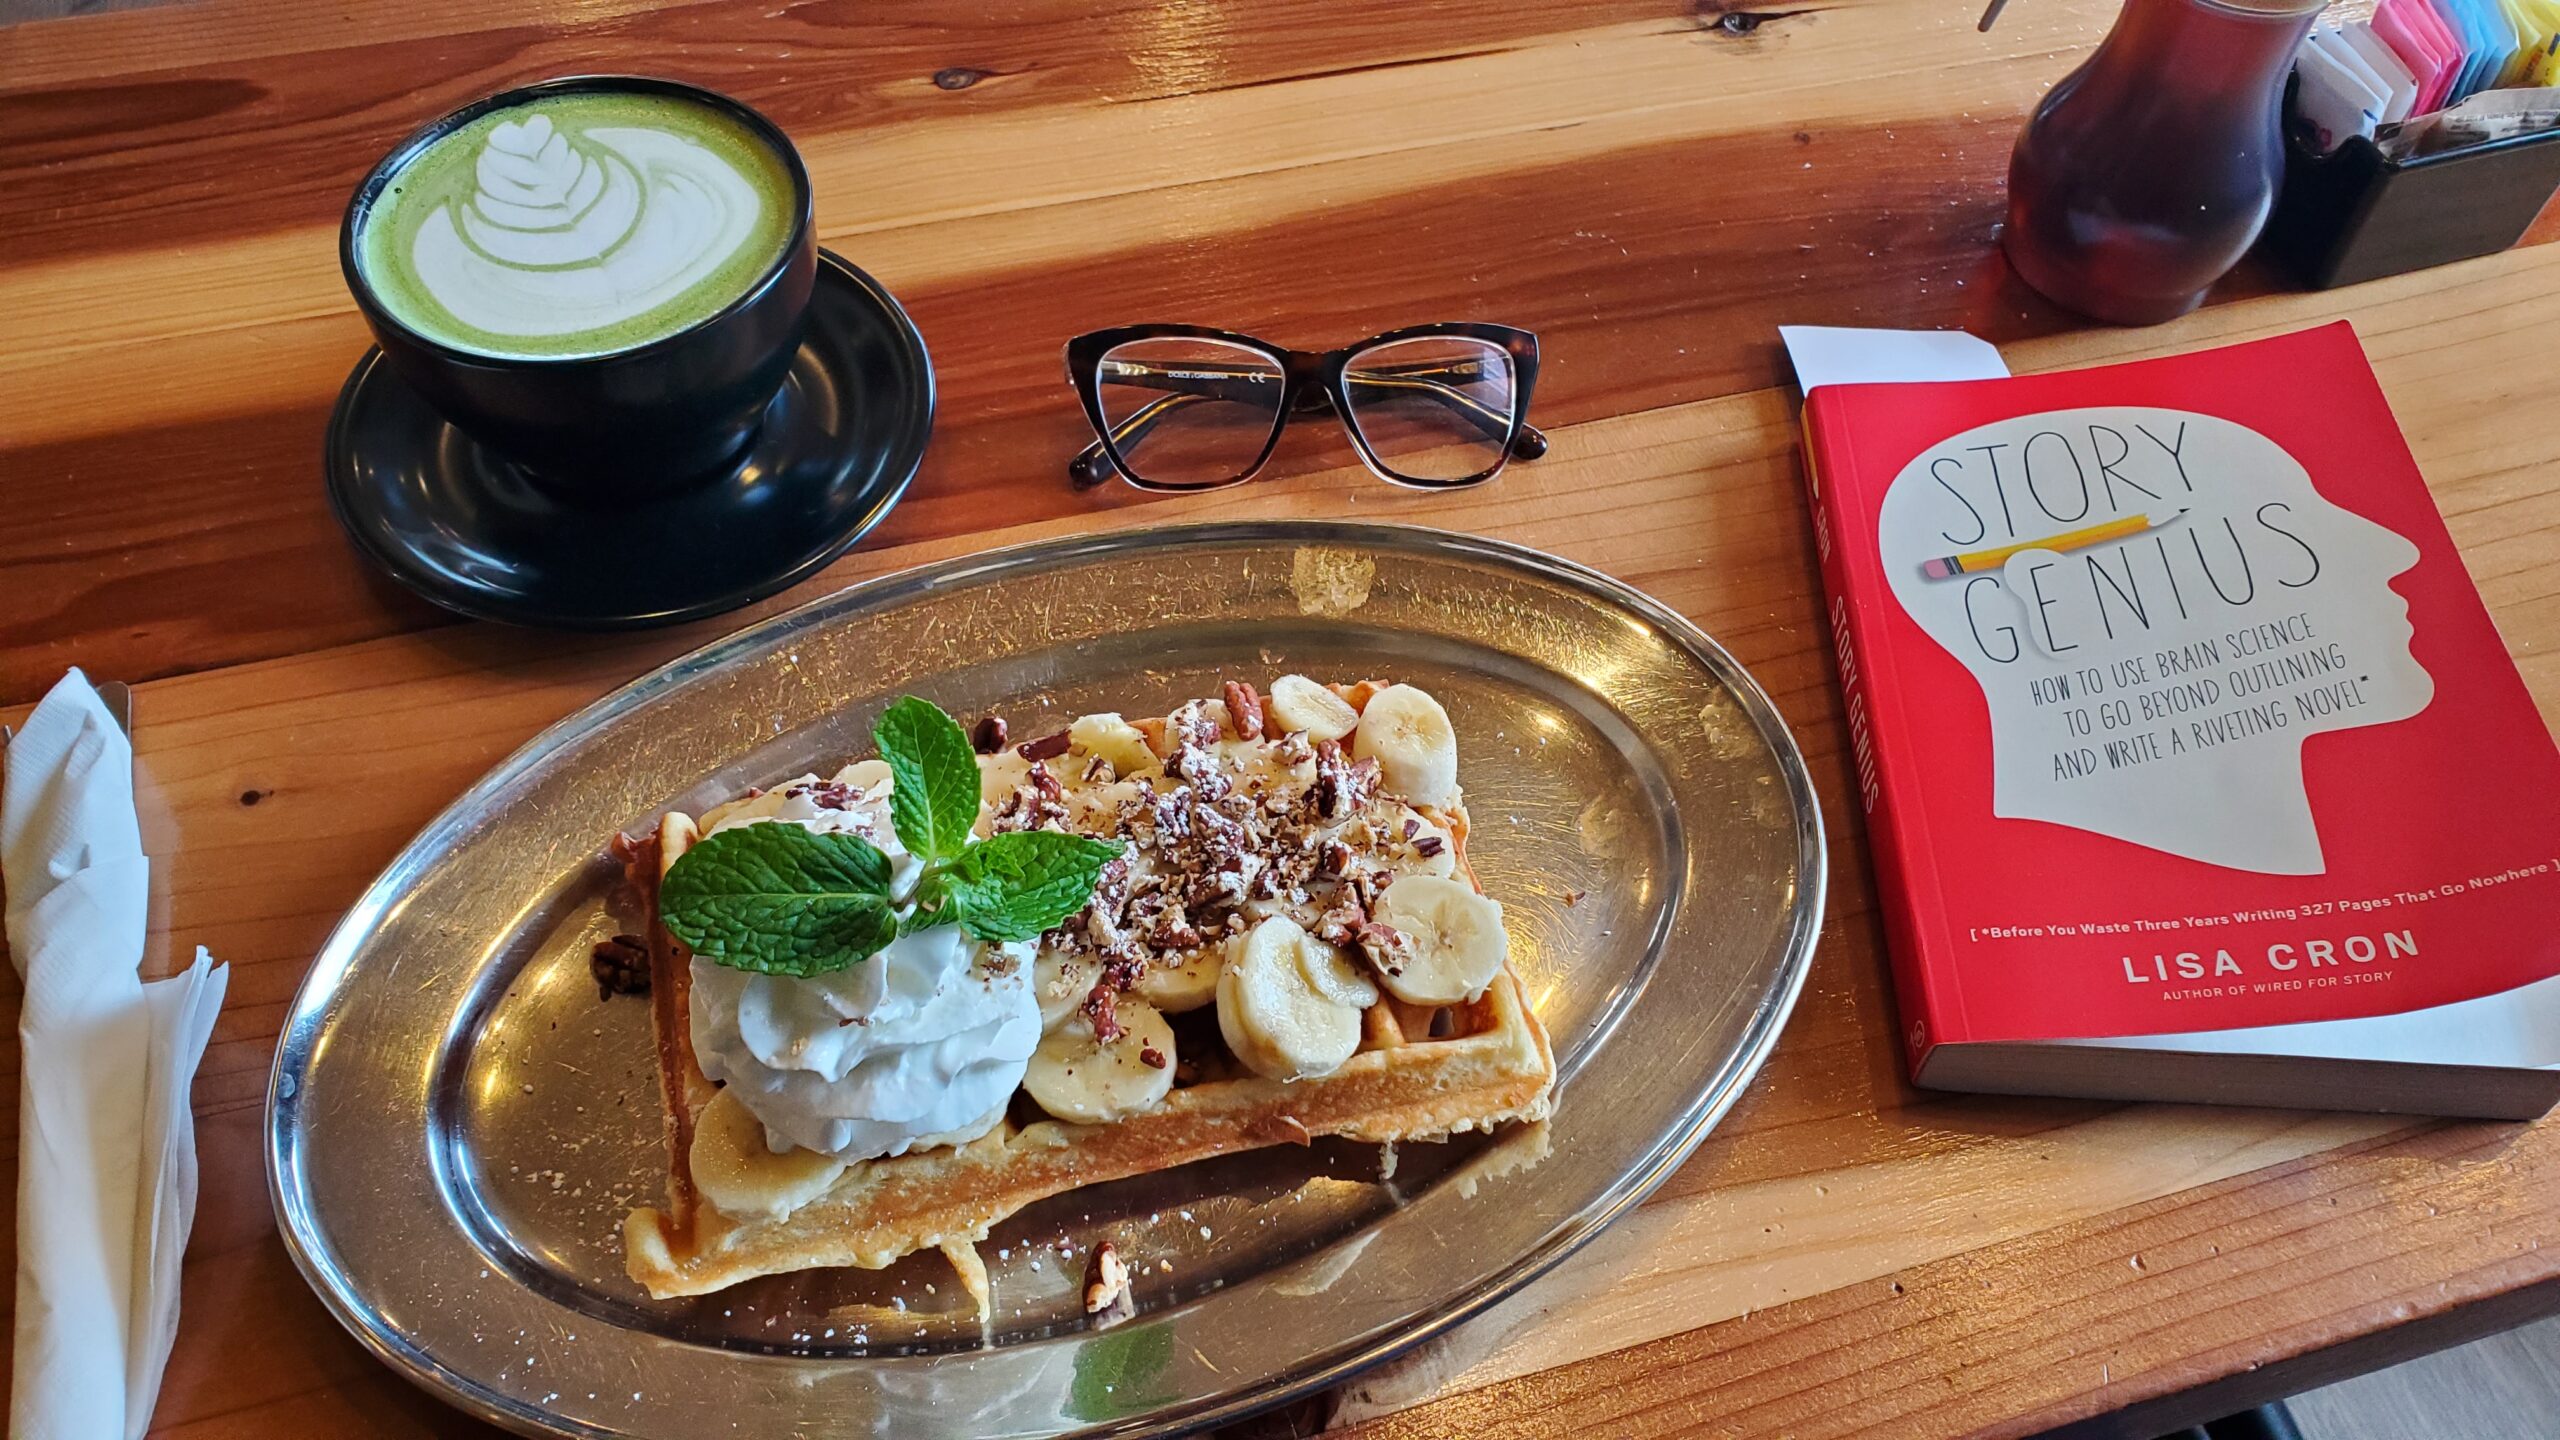 Photo of a meal on a wooden table. A waffle sits on an ovular metal plate. The waffle is topped with bananas, crushed walnuts, whipped cream, and a sprig of mint. Beside the plate is a book: STORY GENIUS by Lisa Cron. Above the plate is a mug of hot matcha latte with a leaf design in cream, and a pair of glasses.